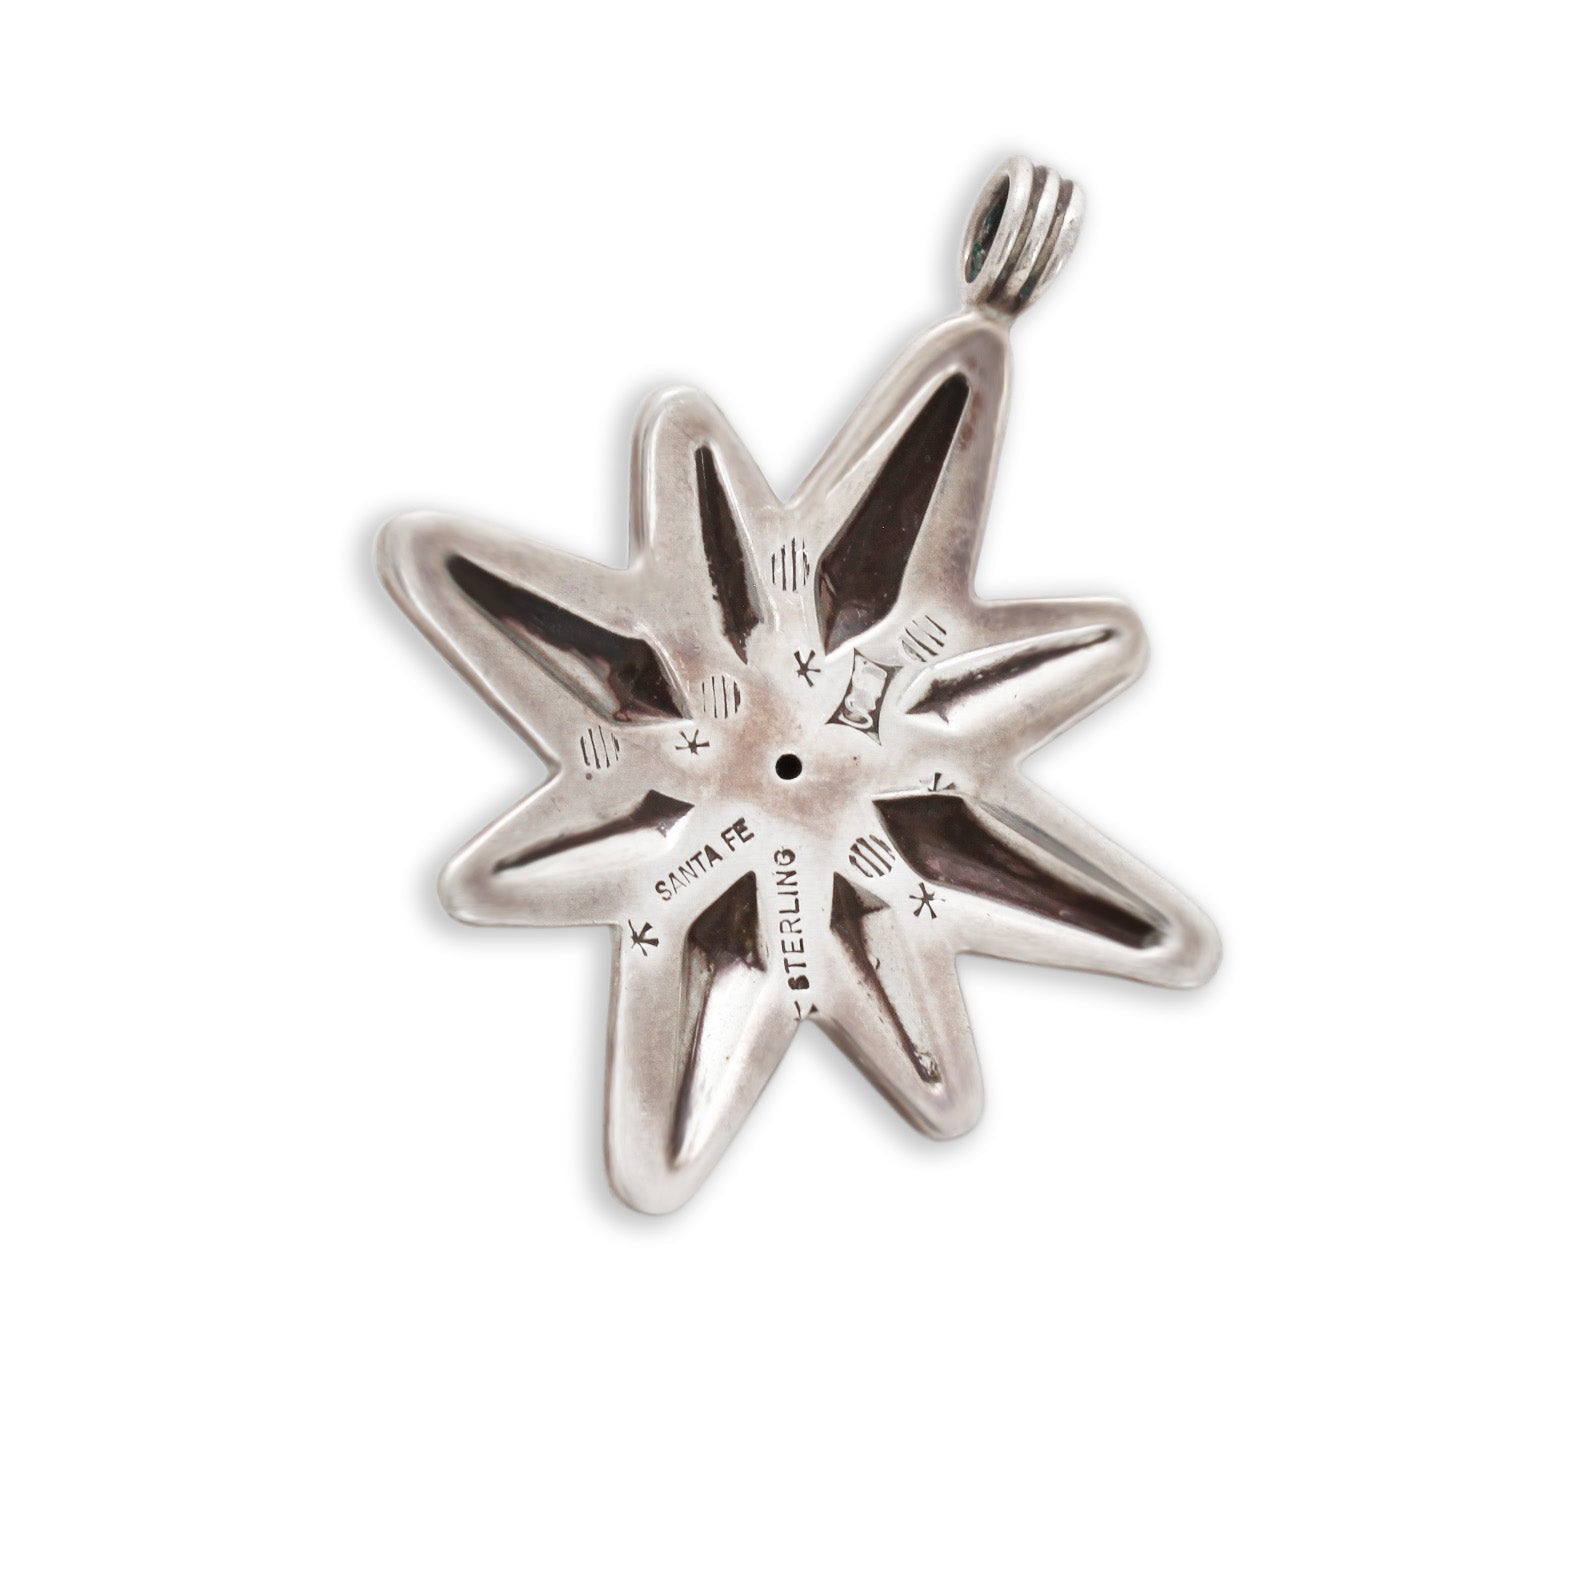 Navajo Silver Repousse Star Pendant With Spike By Cody Sanderson - Turquoise & Tufa